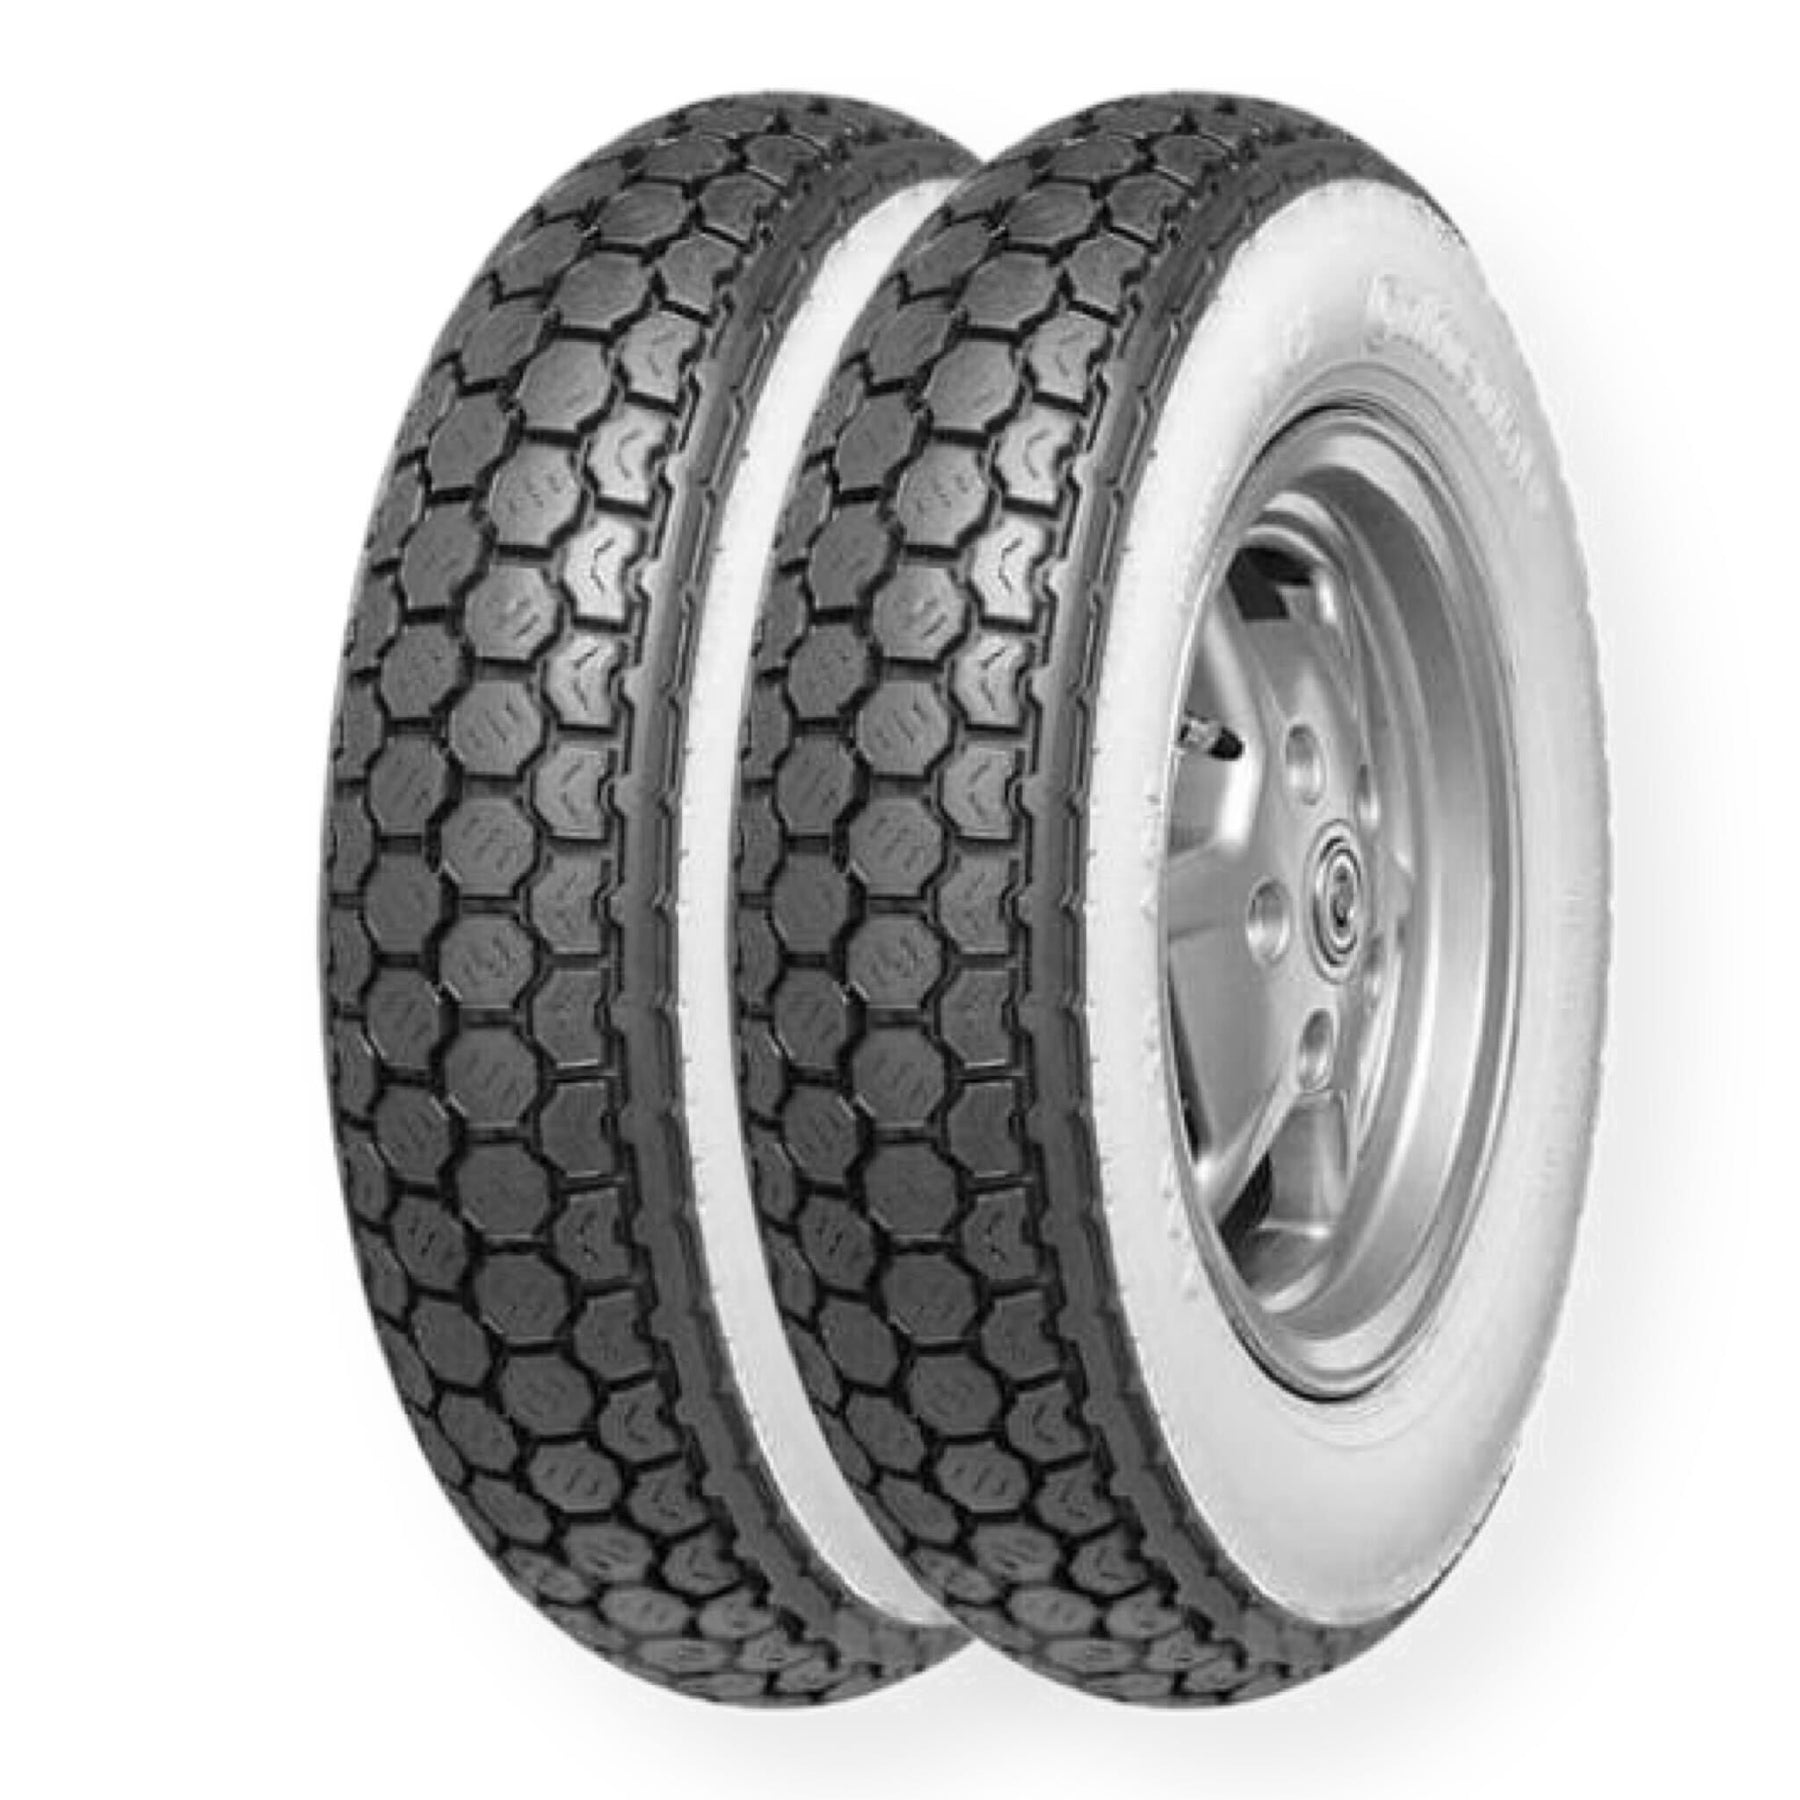 Continental - 300 X 10 - Whitewall Tyre - 2 Tyre Bundle